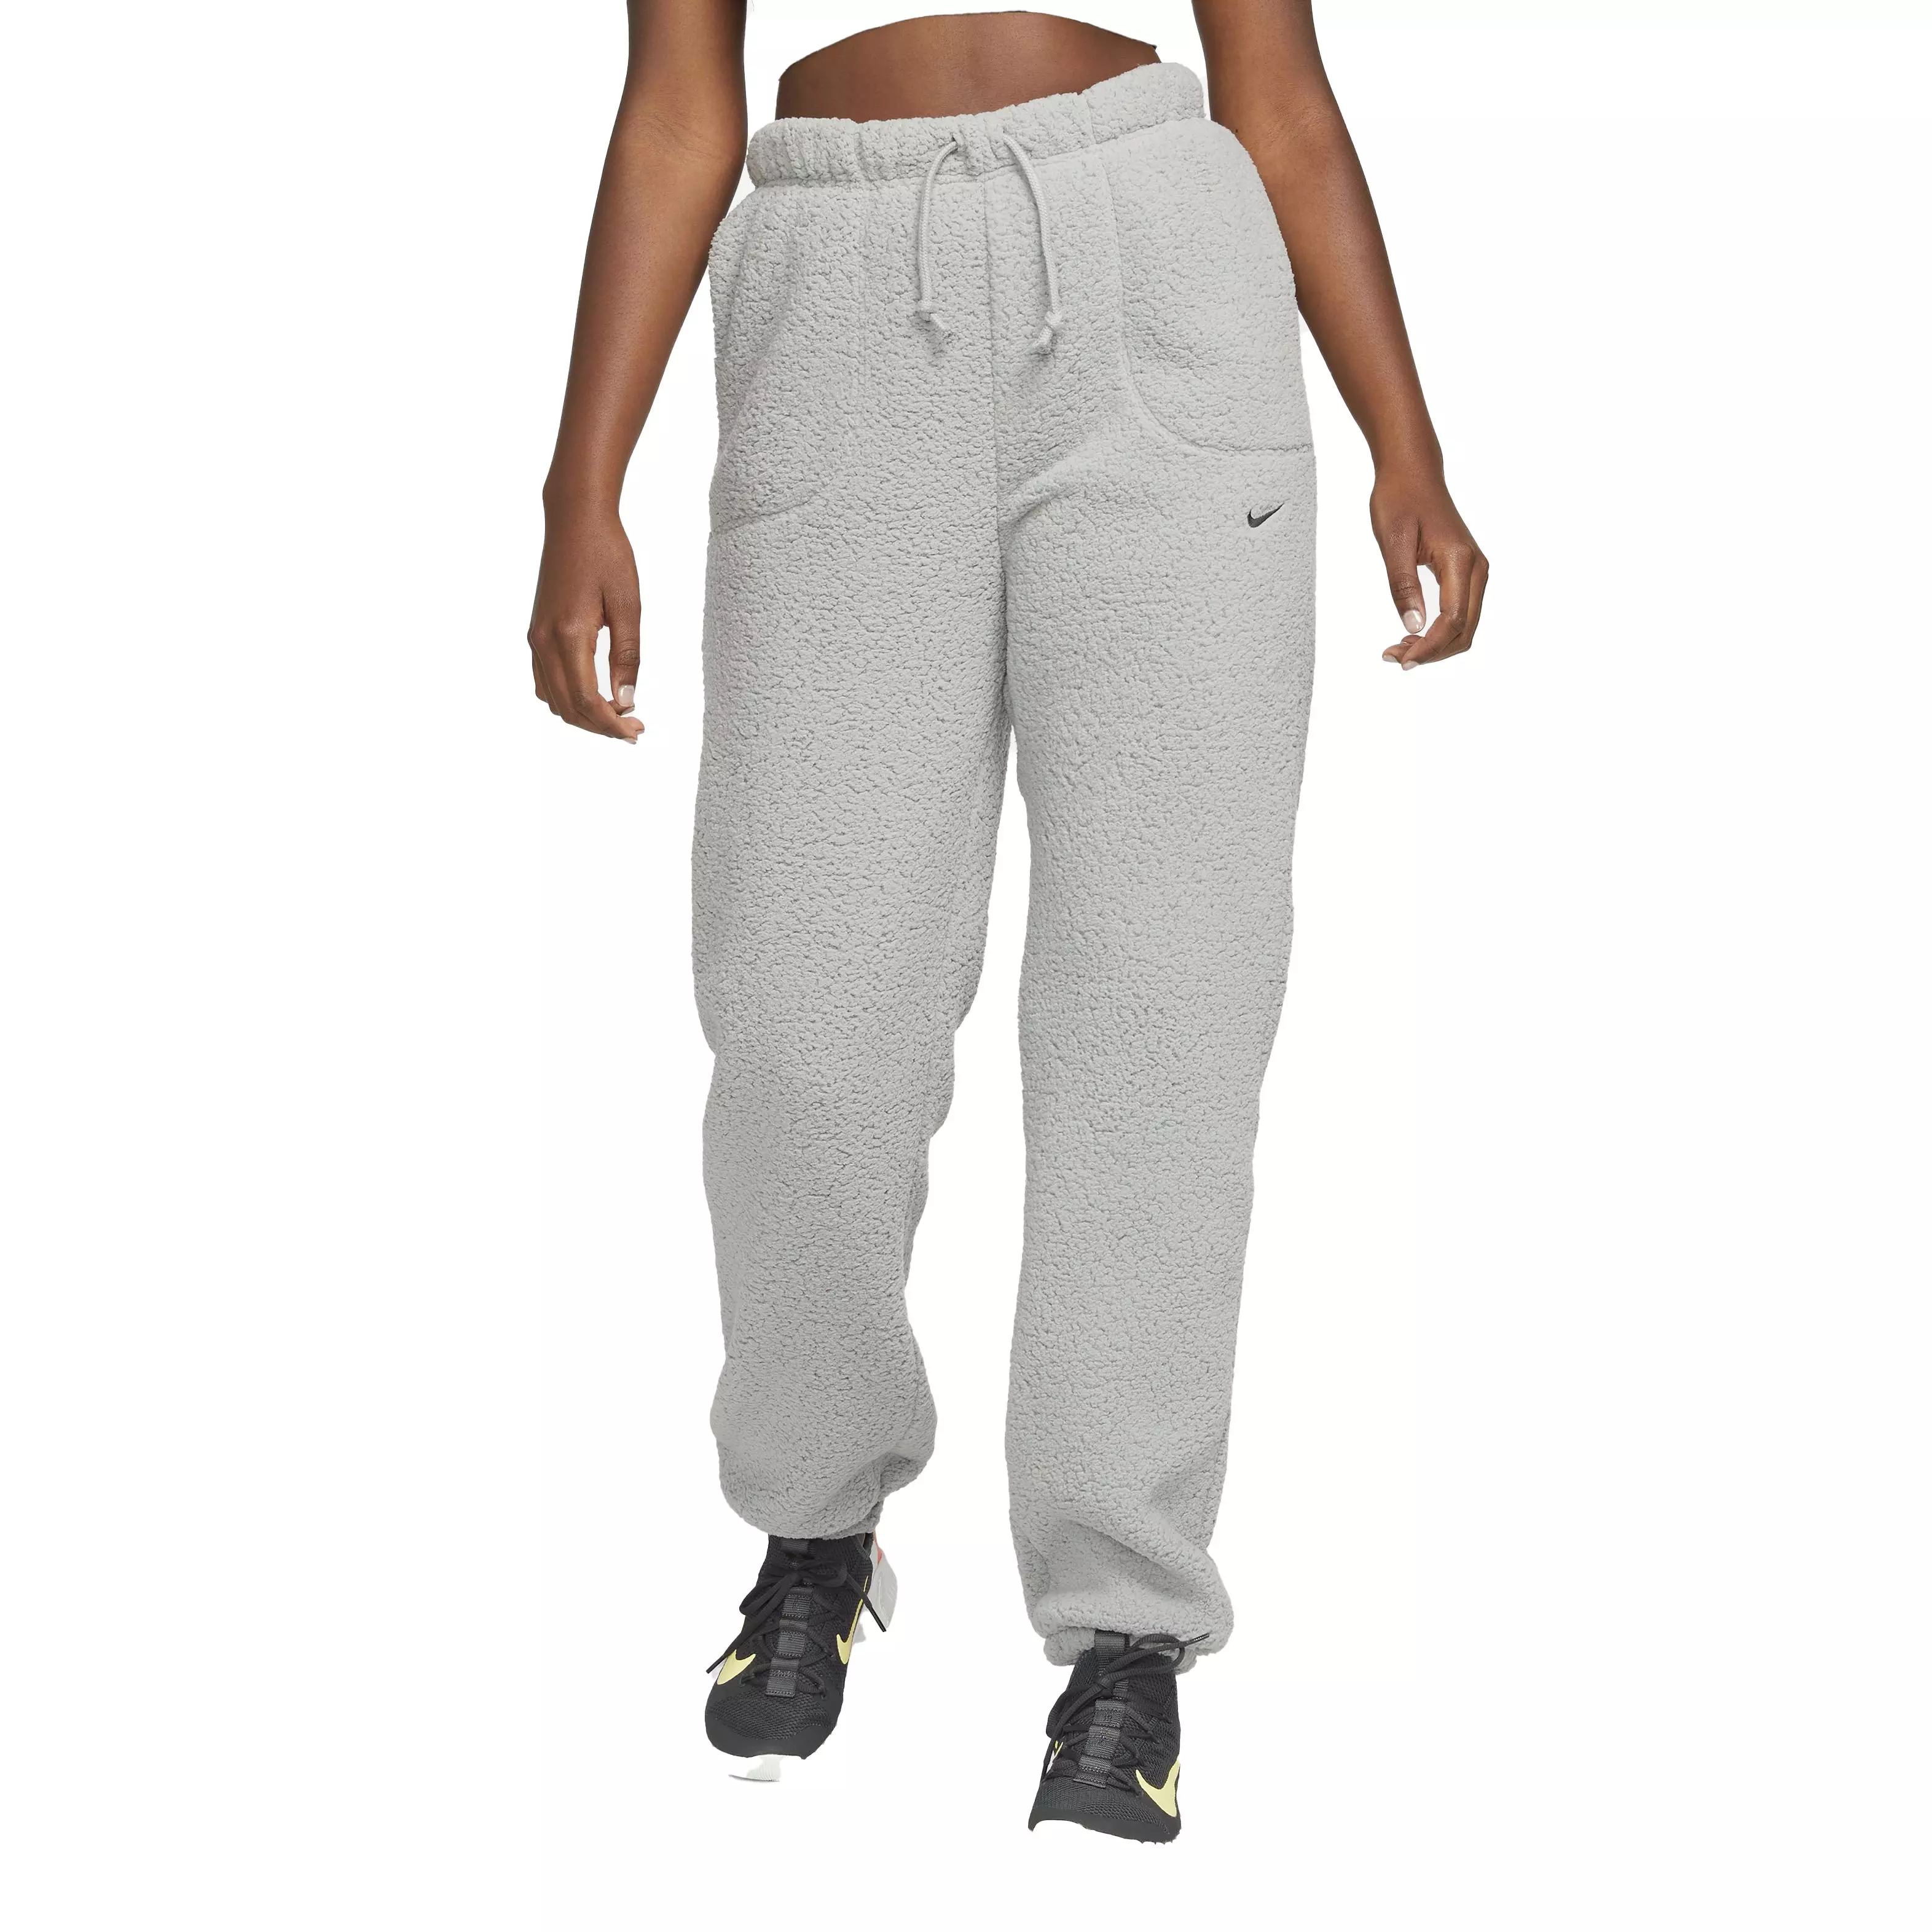 Nike Training Therma-FIT cozy wide joggers in pink